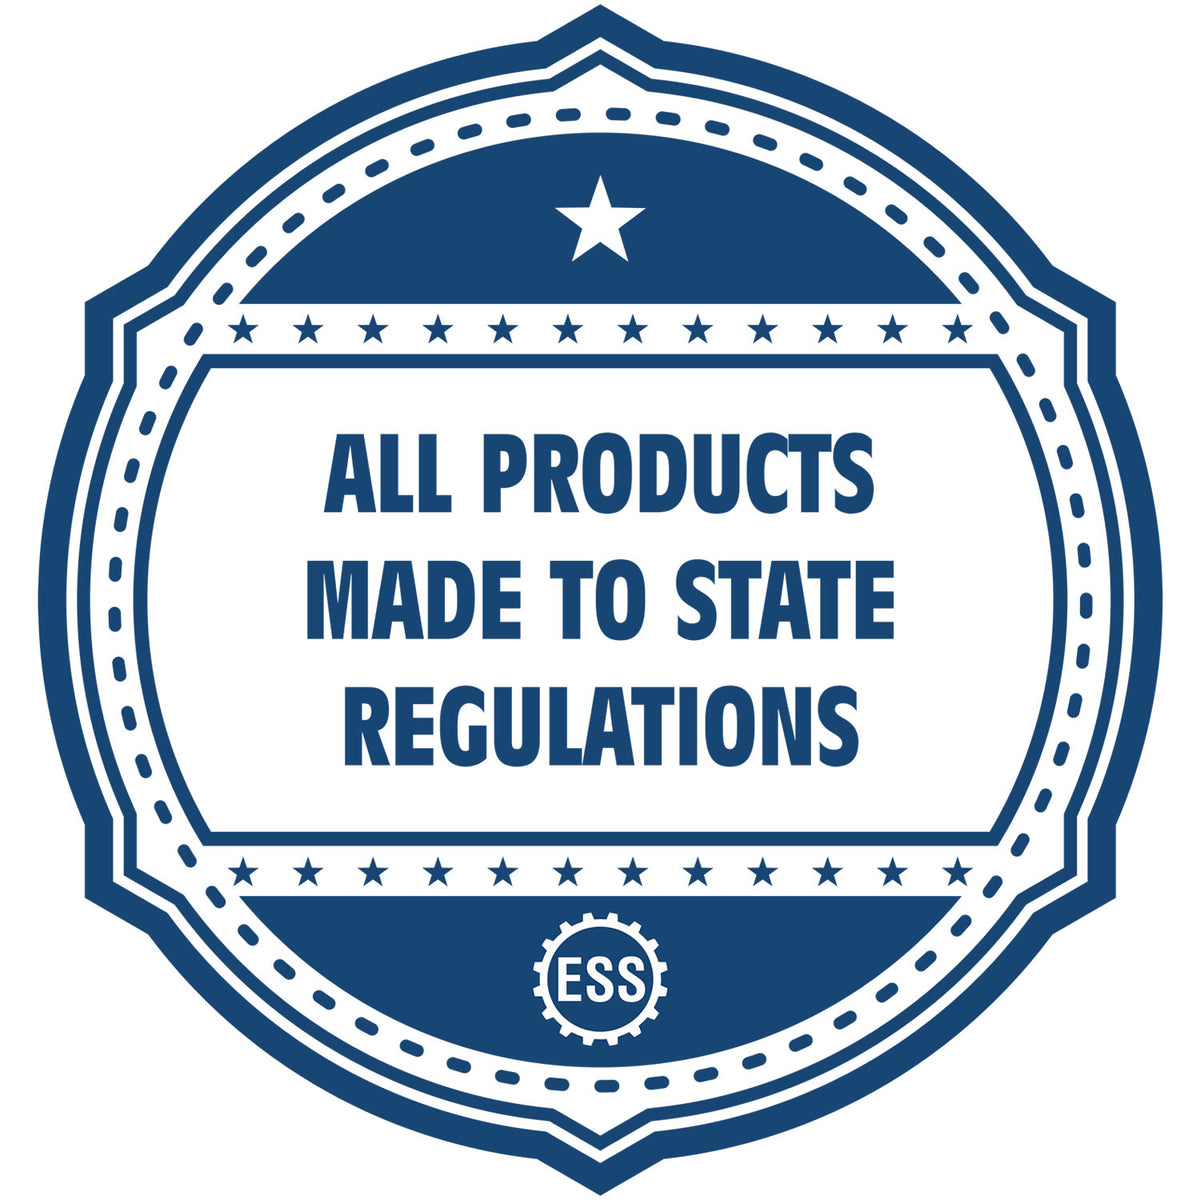 An icon or badge element for the Slim Pre-Inked Nevada Land Surveyor Seal Stamp showing that this product is made in compliance with state regulations.